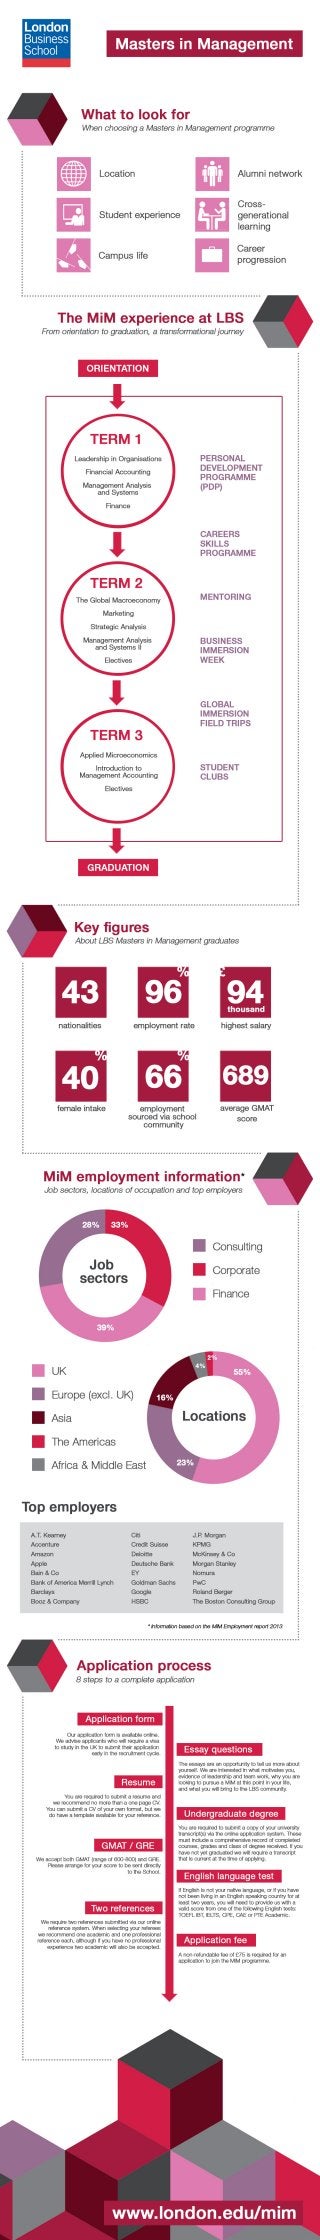 Masters in Management Infographic